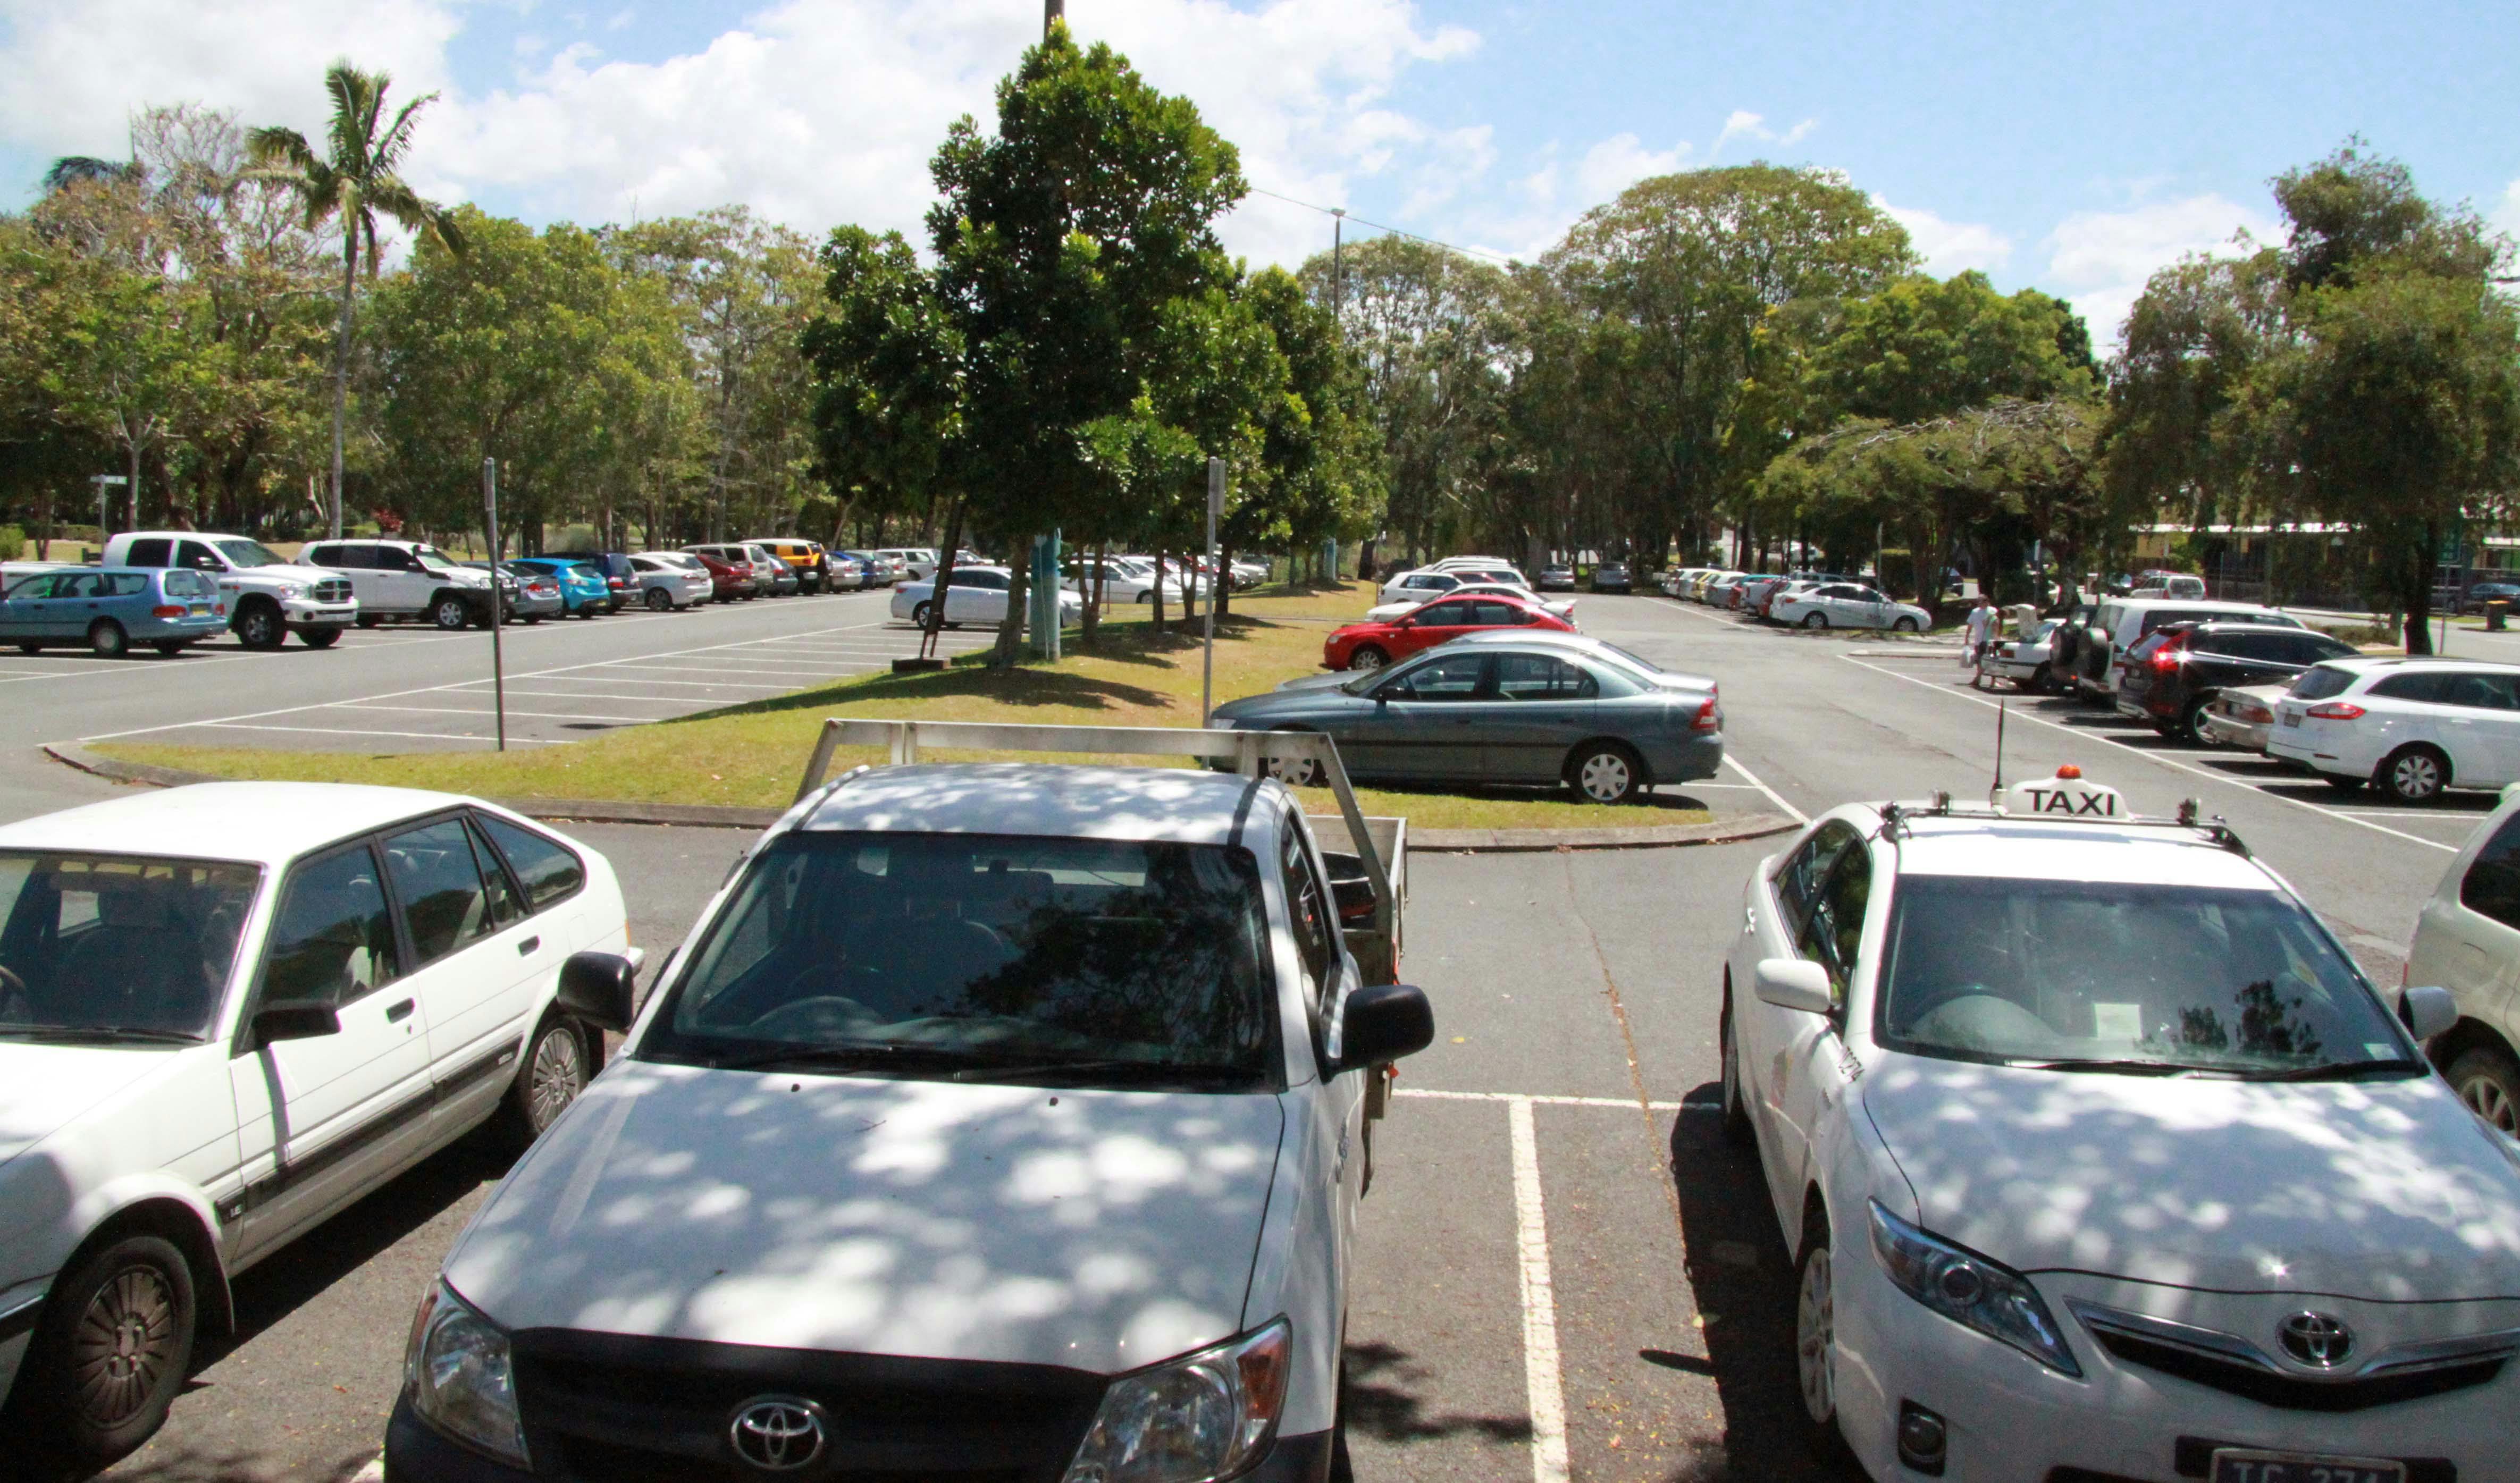 A small number of car parks could be lost to make space for the entry plaza.